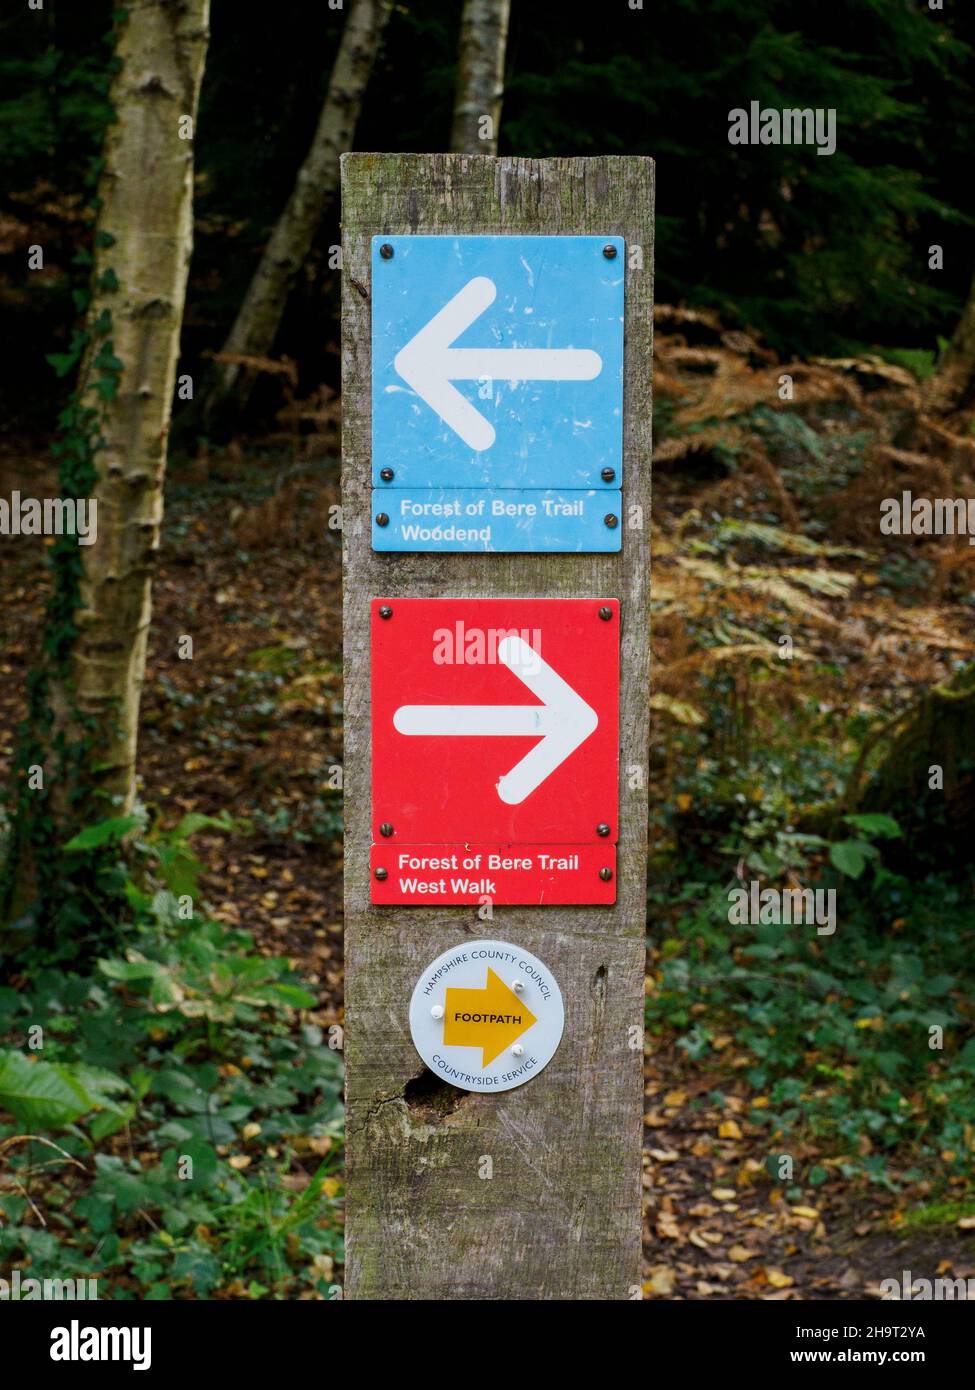 Trail markers at West Walk, Forest of Bere, Fareham, Hampshire, UK Stock Photo